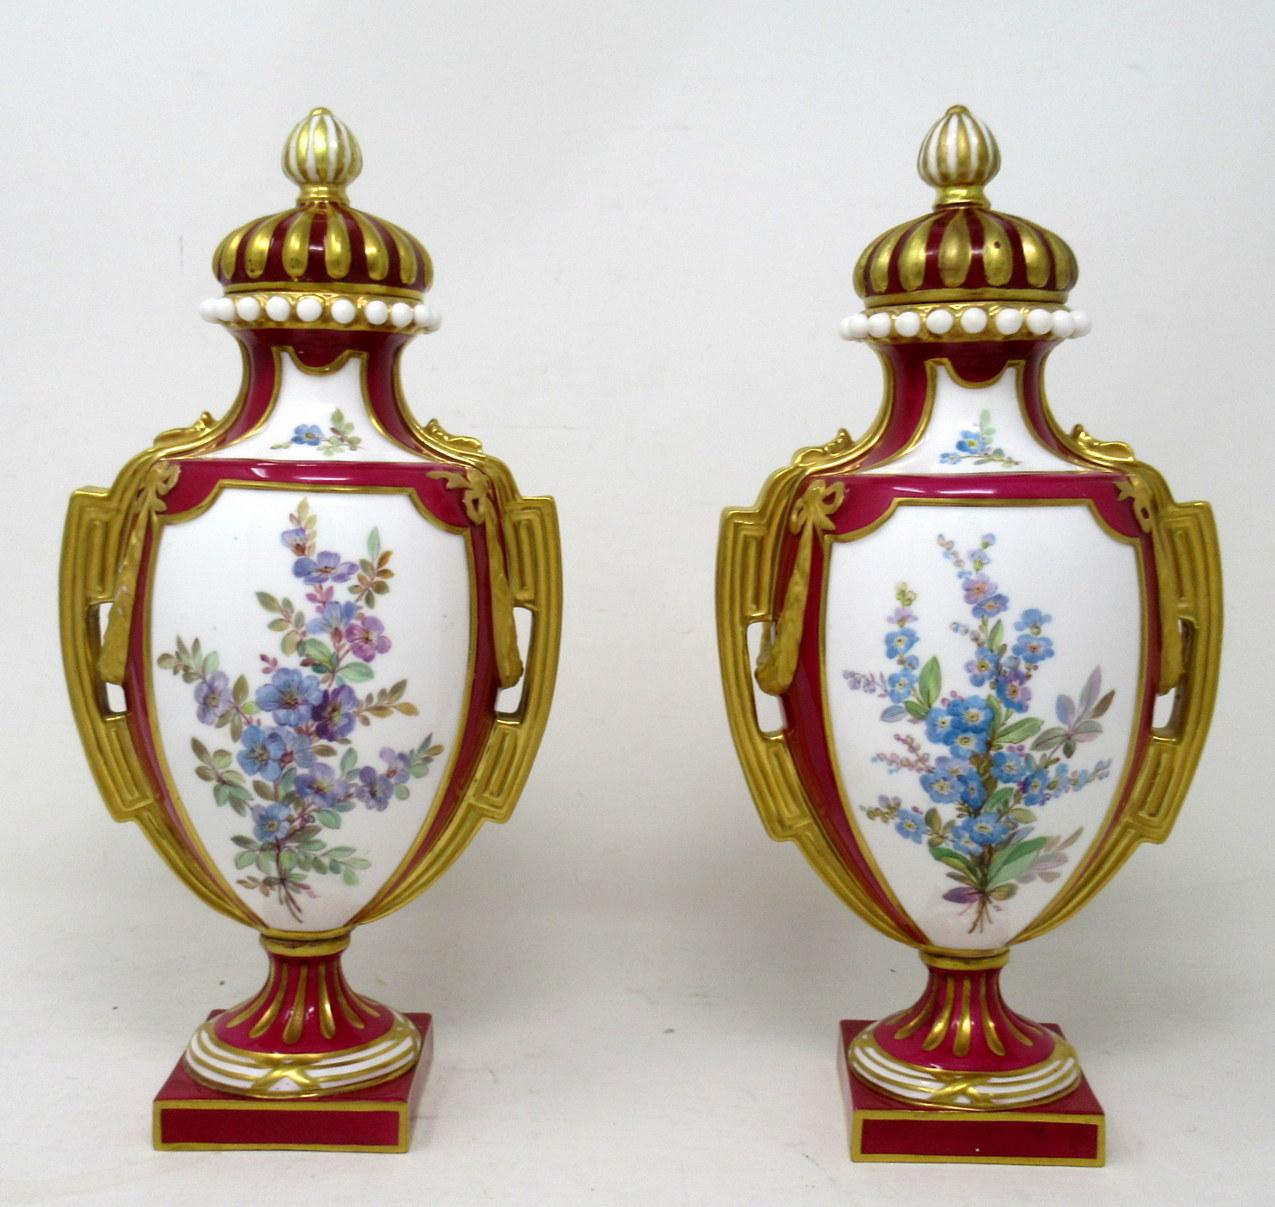 Antique Pair English Royal Crown Derby Porcelain Vases by Antonin Boullemier 19C In Good Condition For Sale In Dublin, Ireland